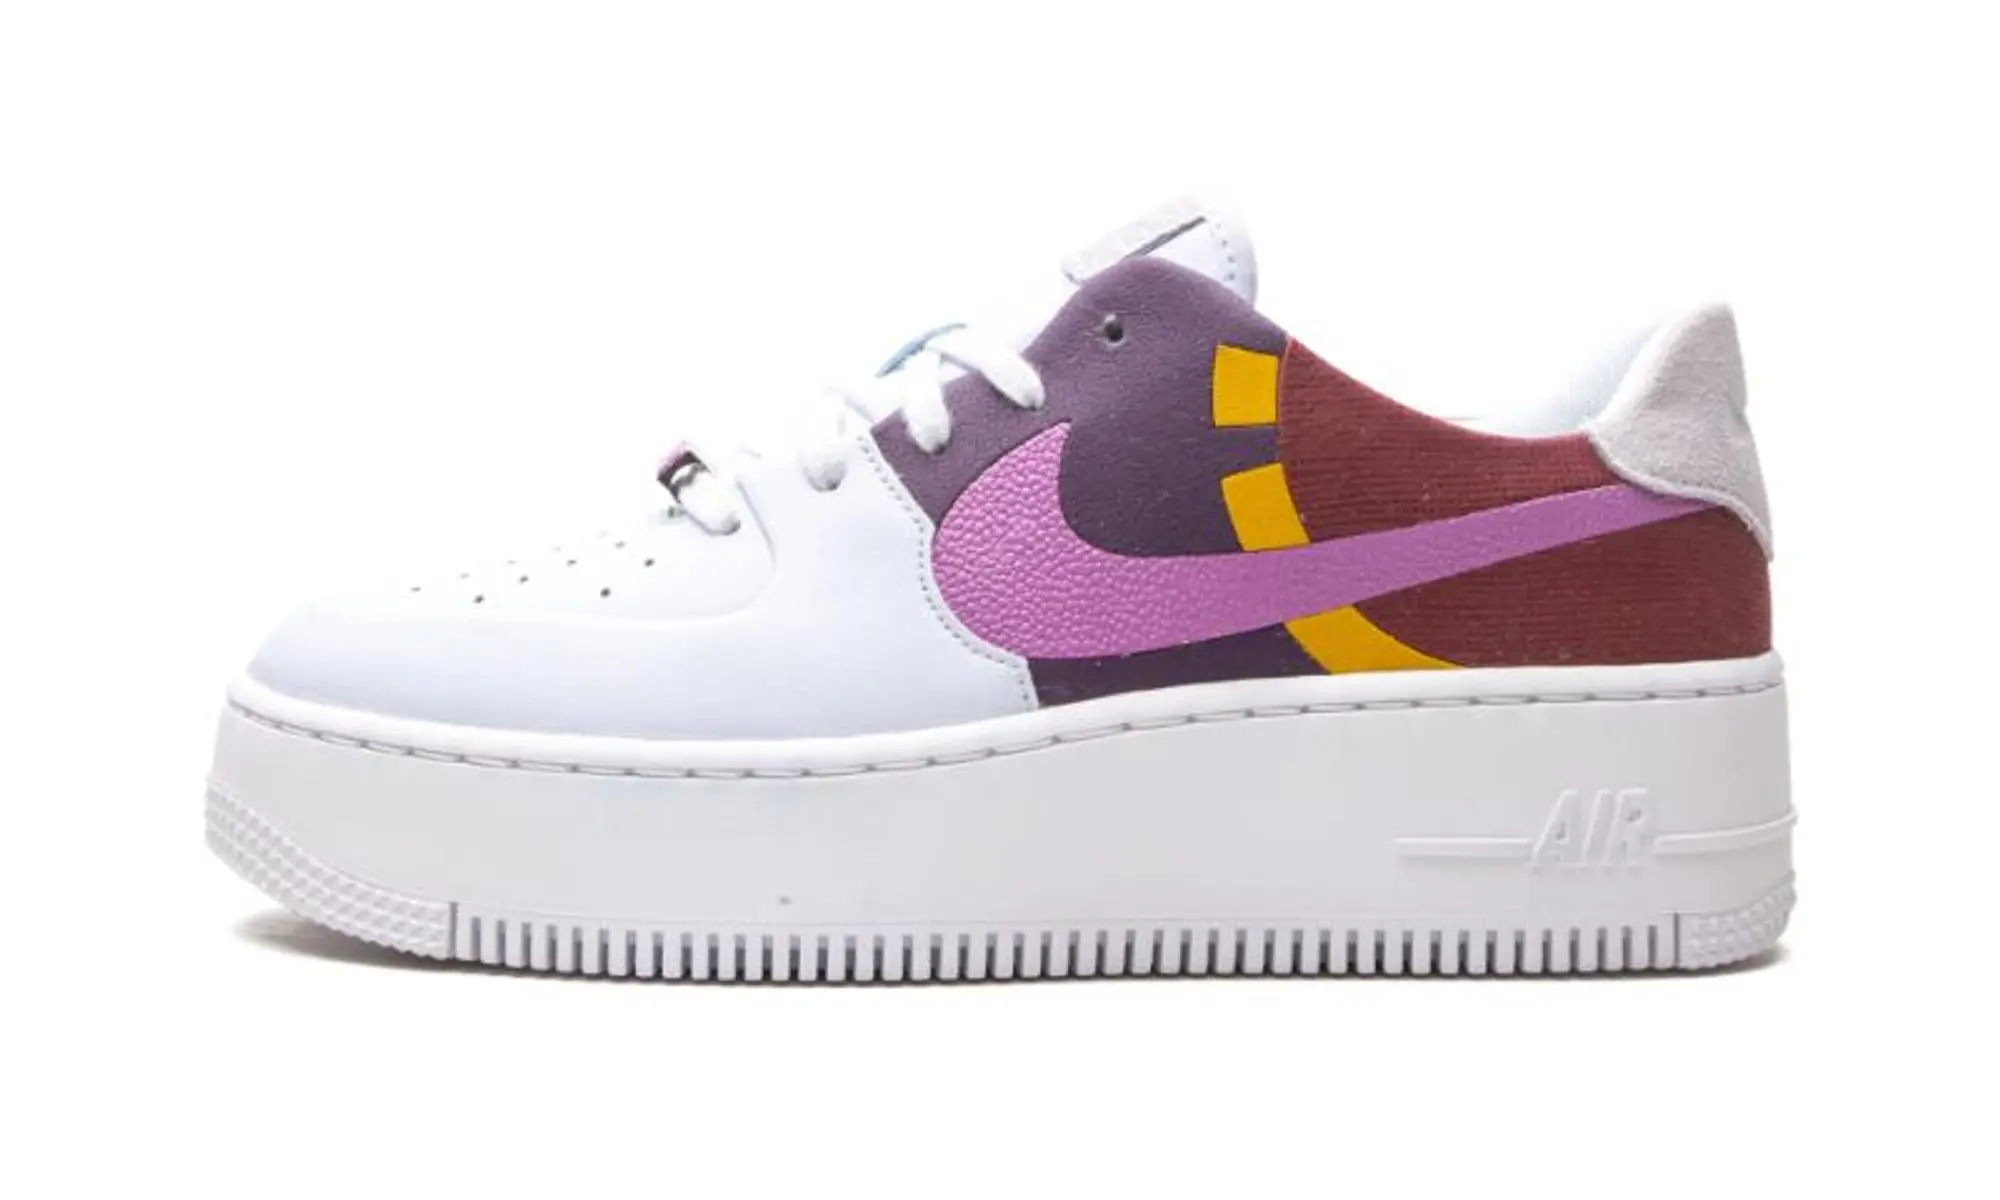 Nike Air Force 1 Sage Low LX Womens Grey Dark Orchid Shoes